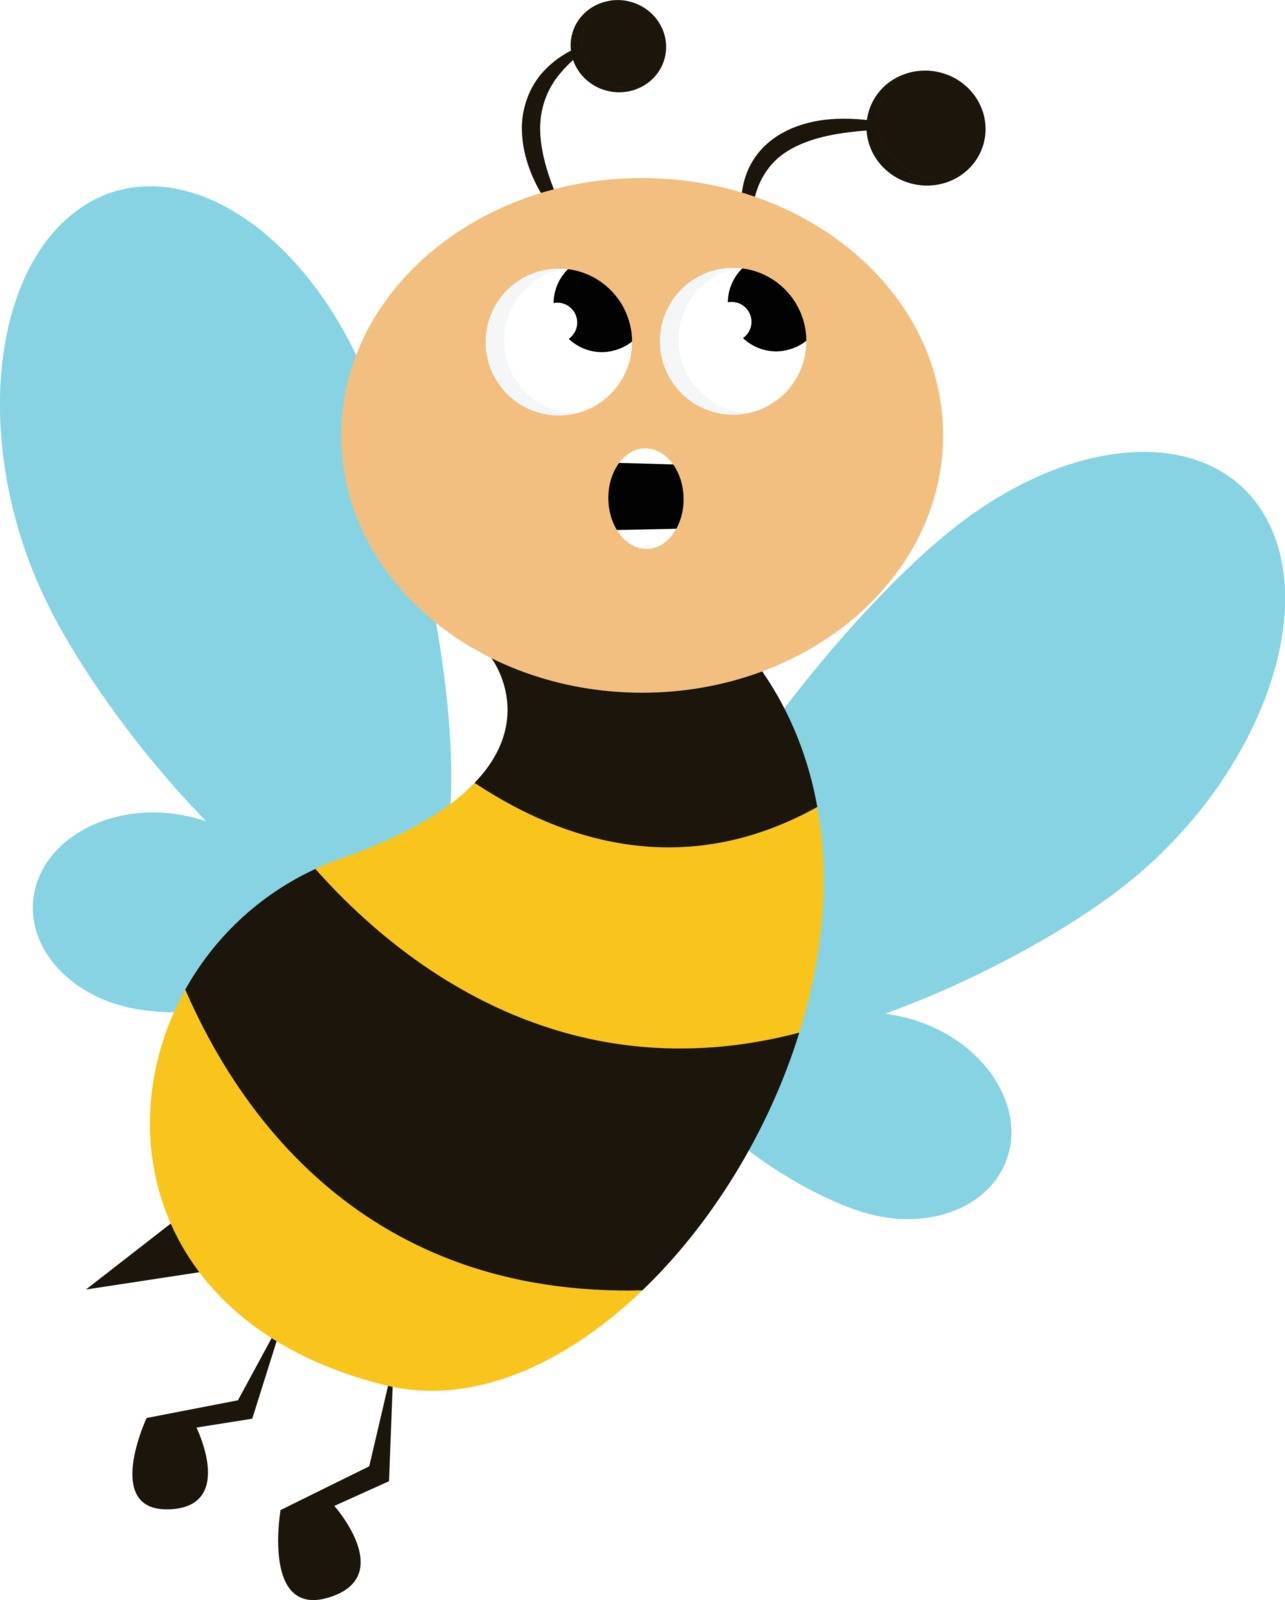 A surprised bee with blue wings with its mouth wide open vector color drawing or illustration